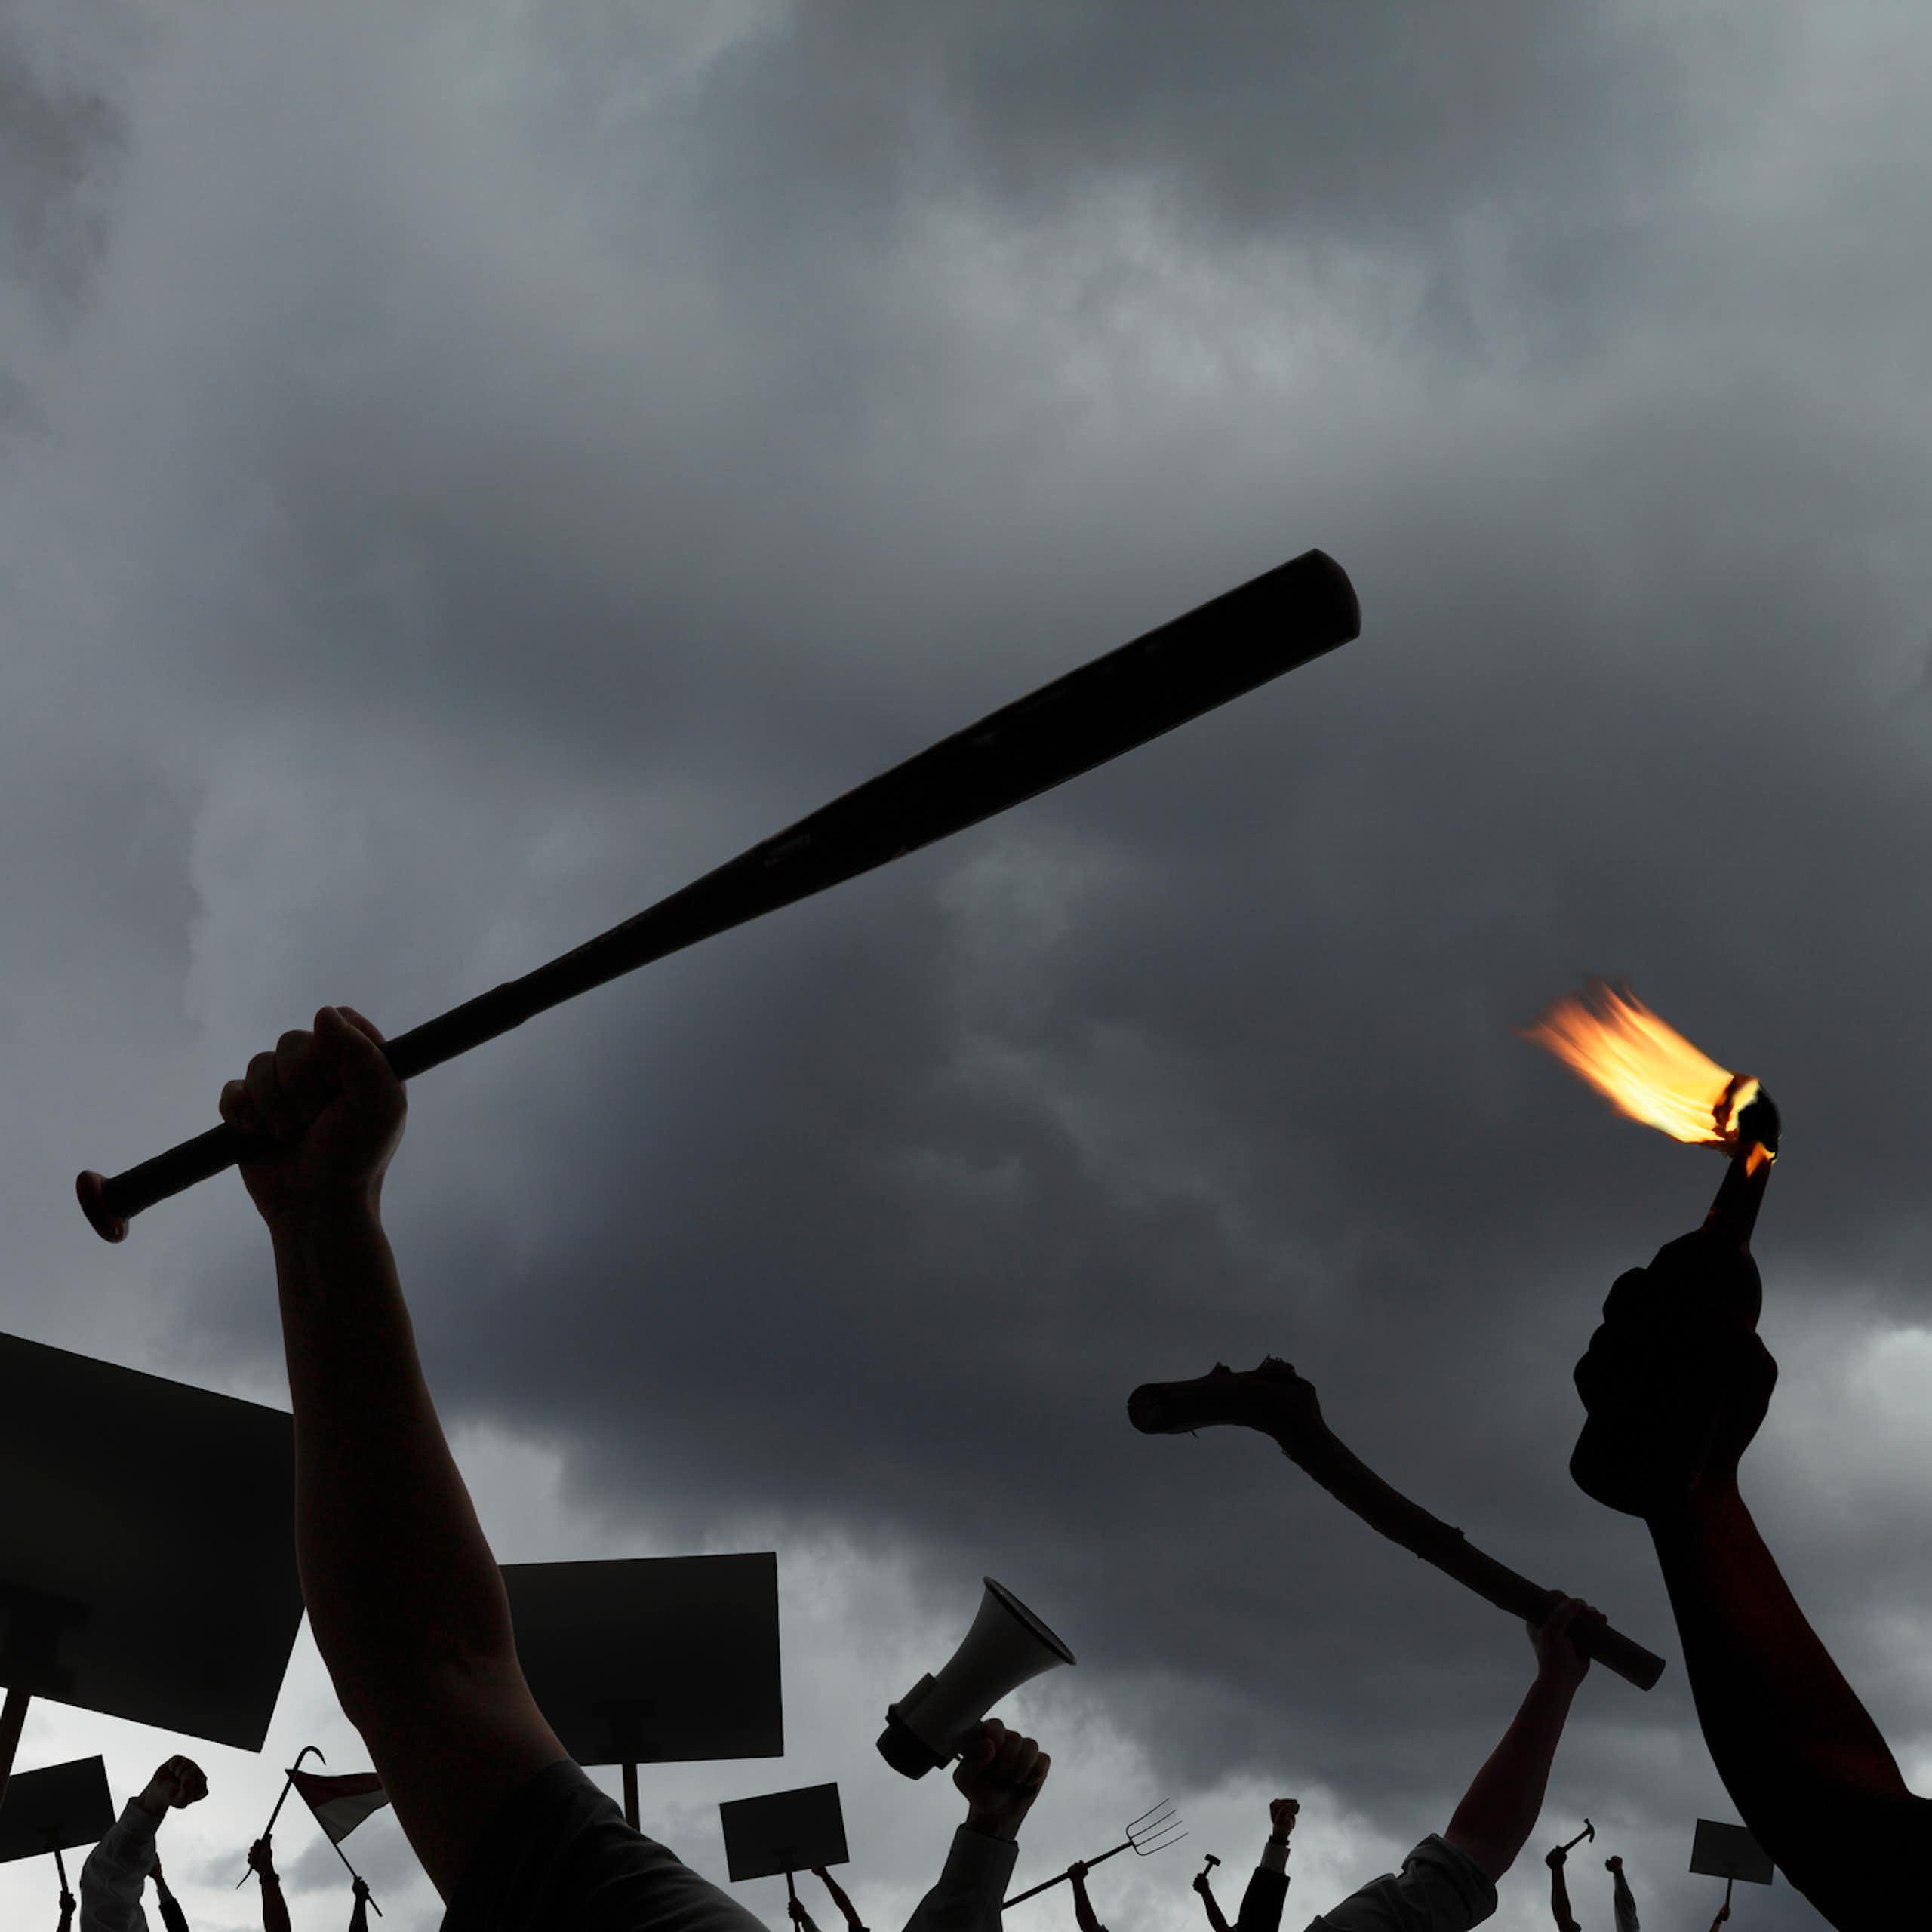 Arms of an angry mob holding protest signs, megaphones, pitchforks, molotov cocktails, and baseball bats, among other weapons